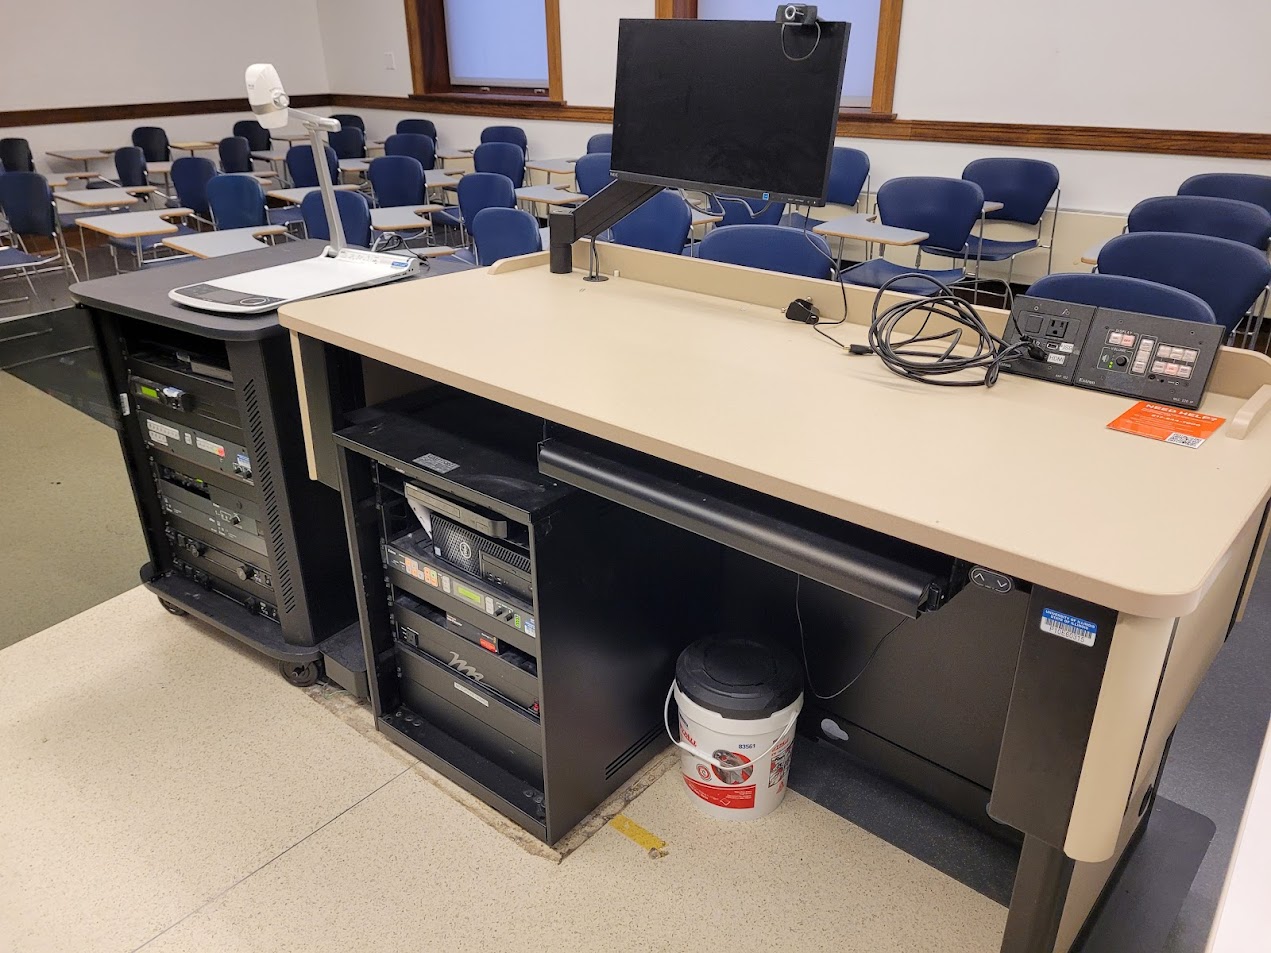 A view of the open cabinet with a computer monitor and HDMI inputs, a push button controller, document camera, and audio visual rack.